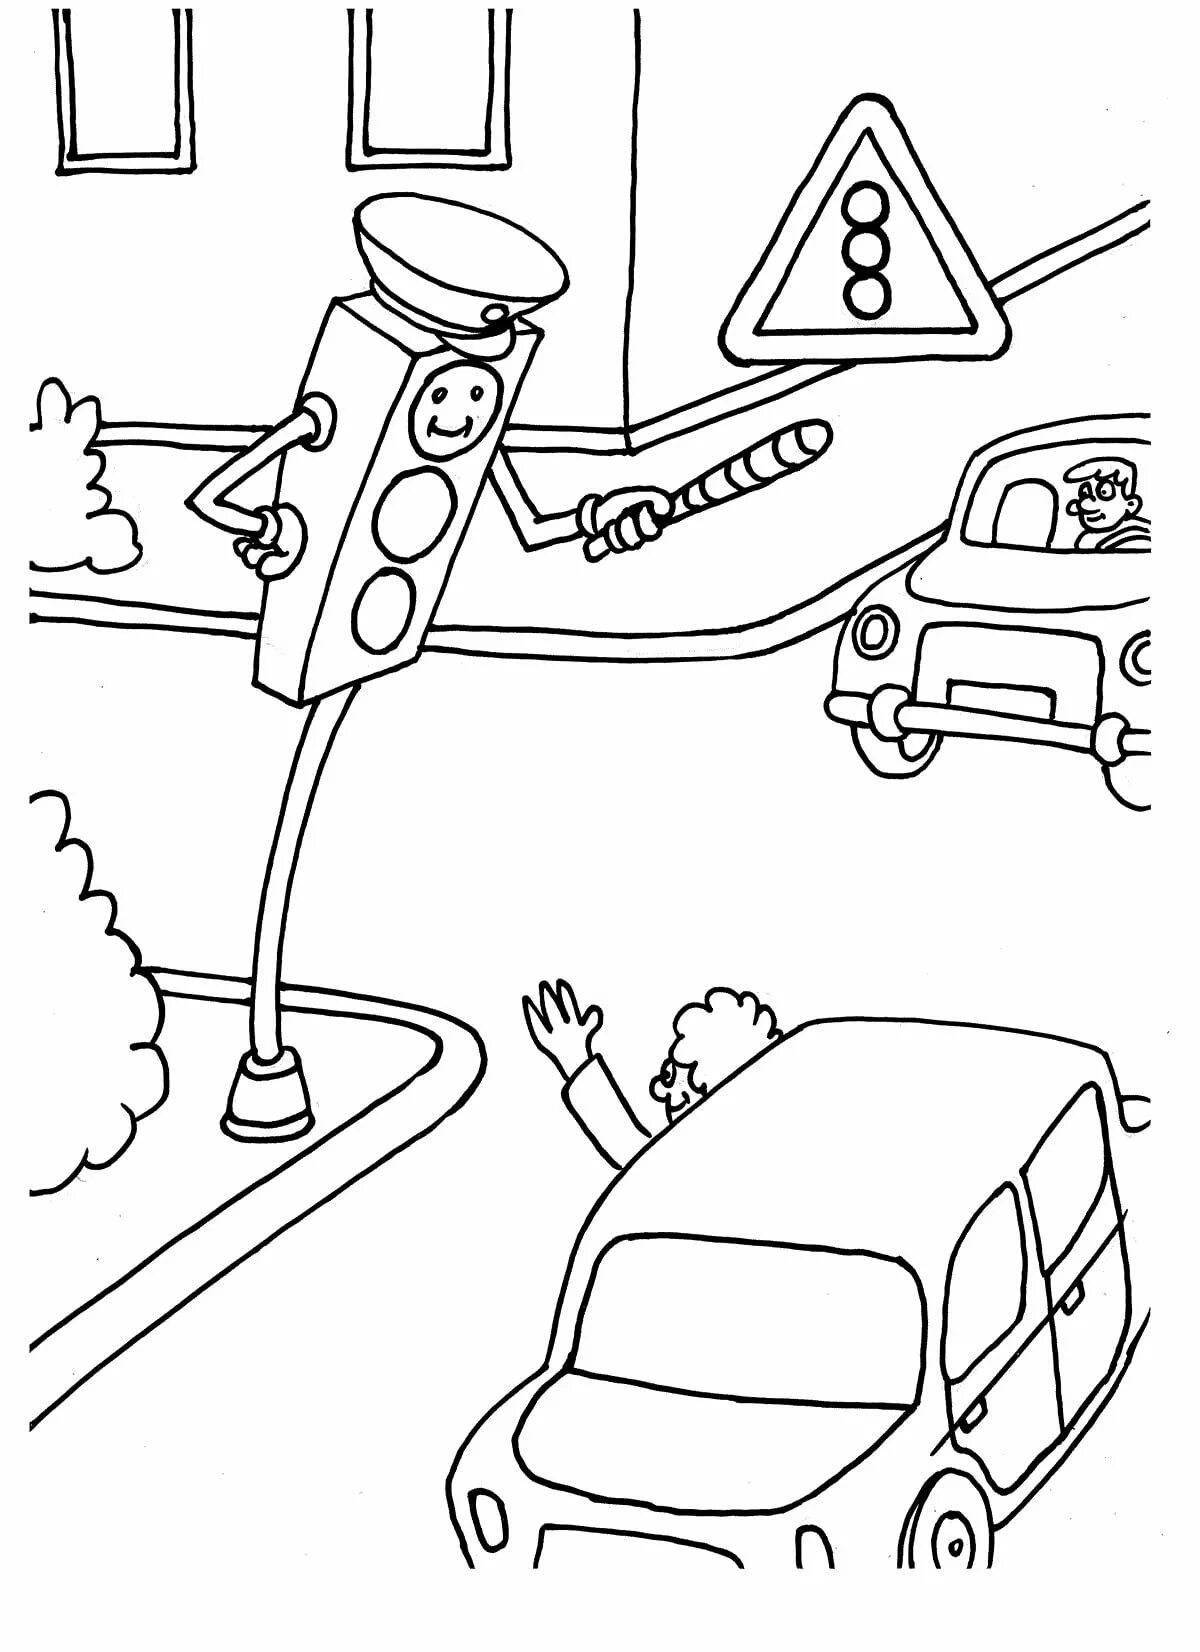 Safety road #13